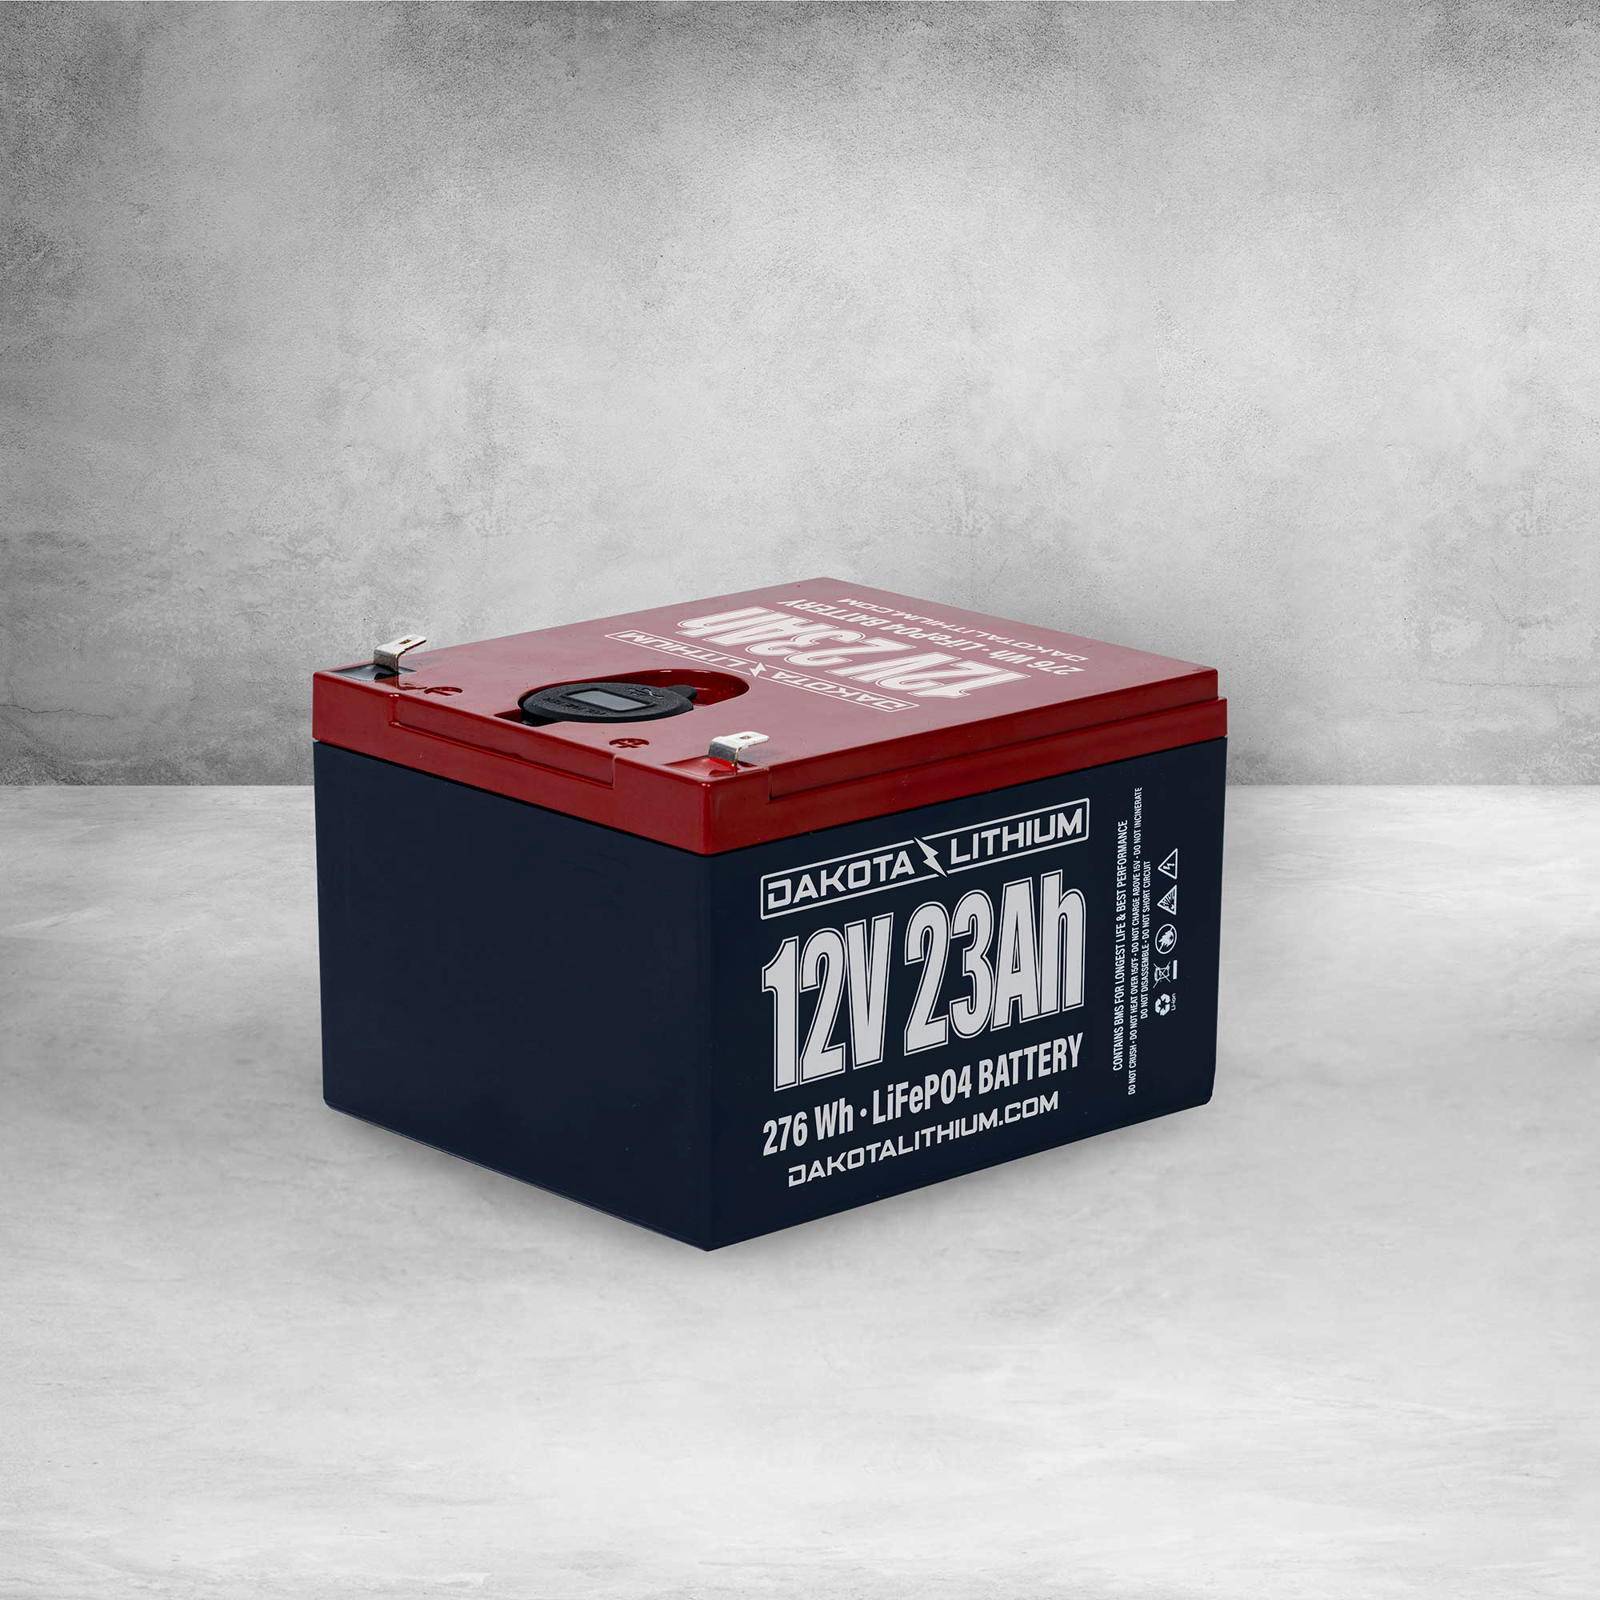 Dakota Lithium 12V 23AH Lithium Battery with Dual USB and Voltmeter. Only  5lbs. In Stock and Free Shipping Anywhere in Canada! Full 11 Year Warranty